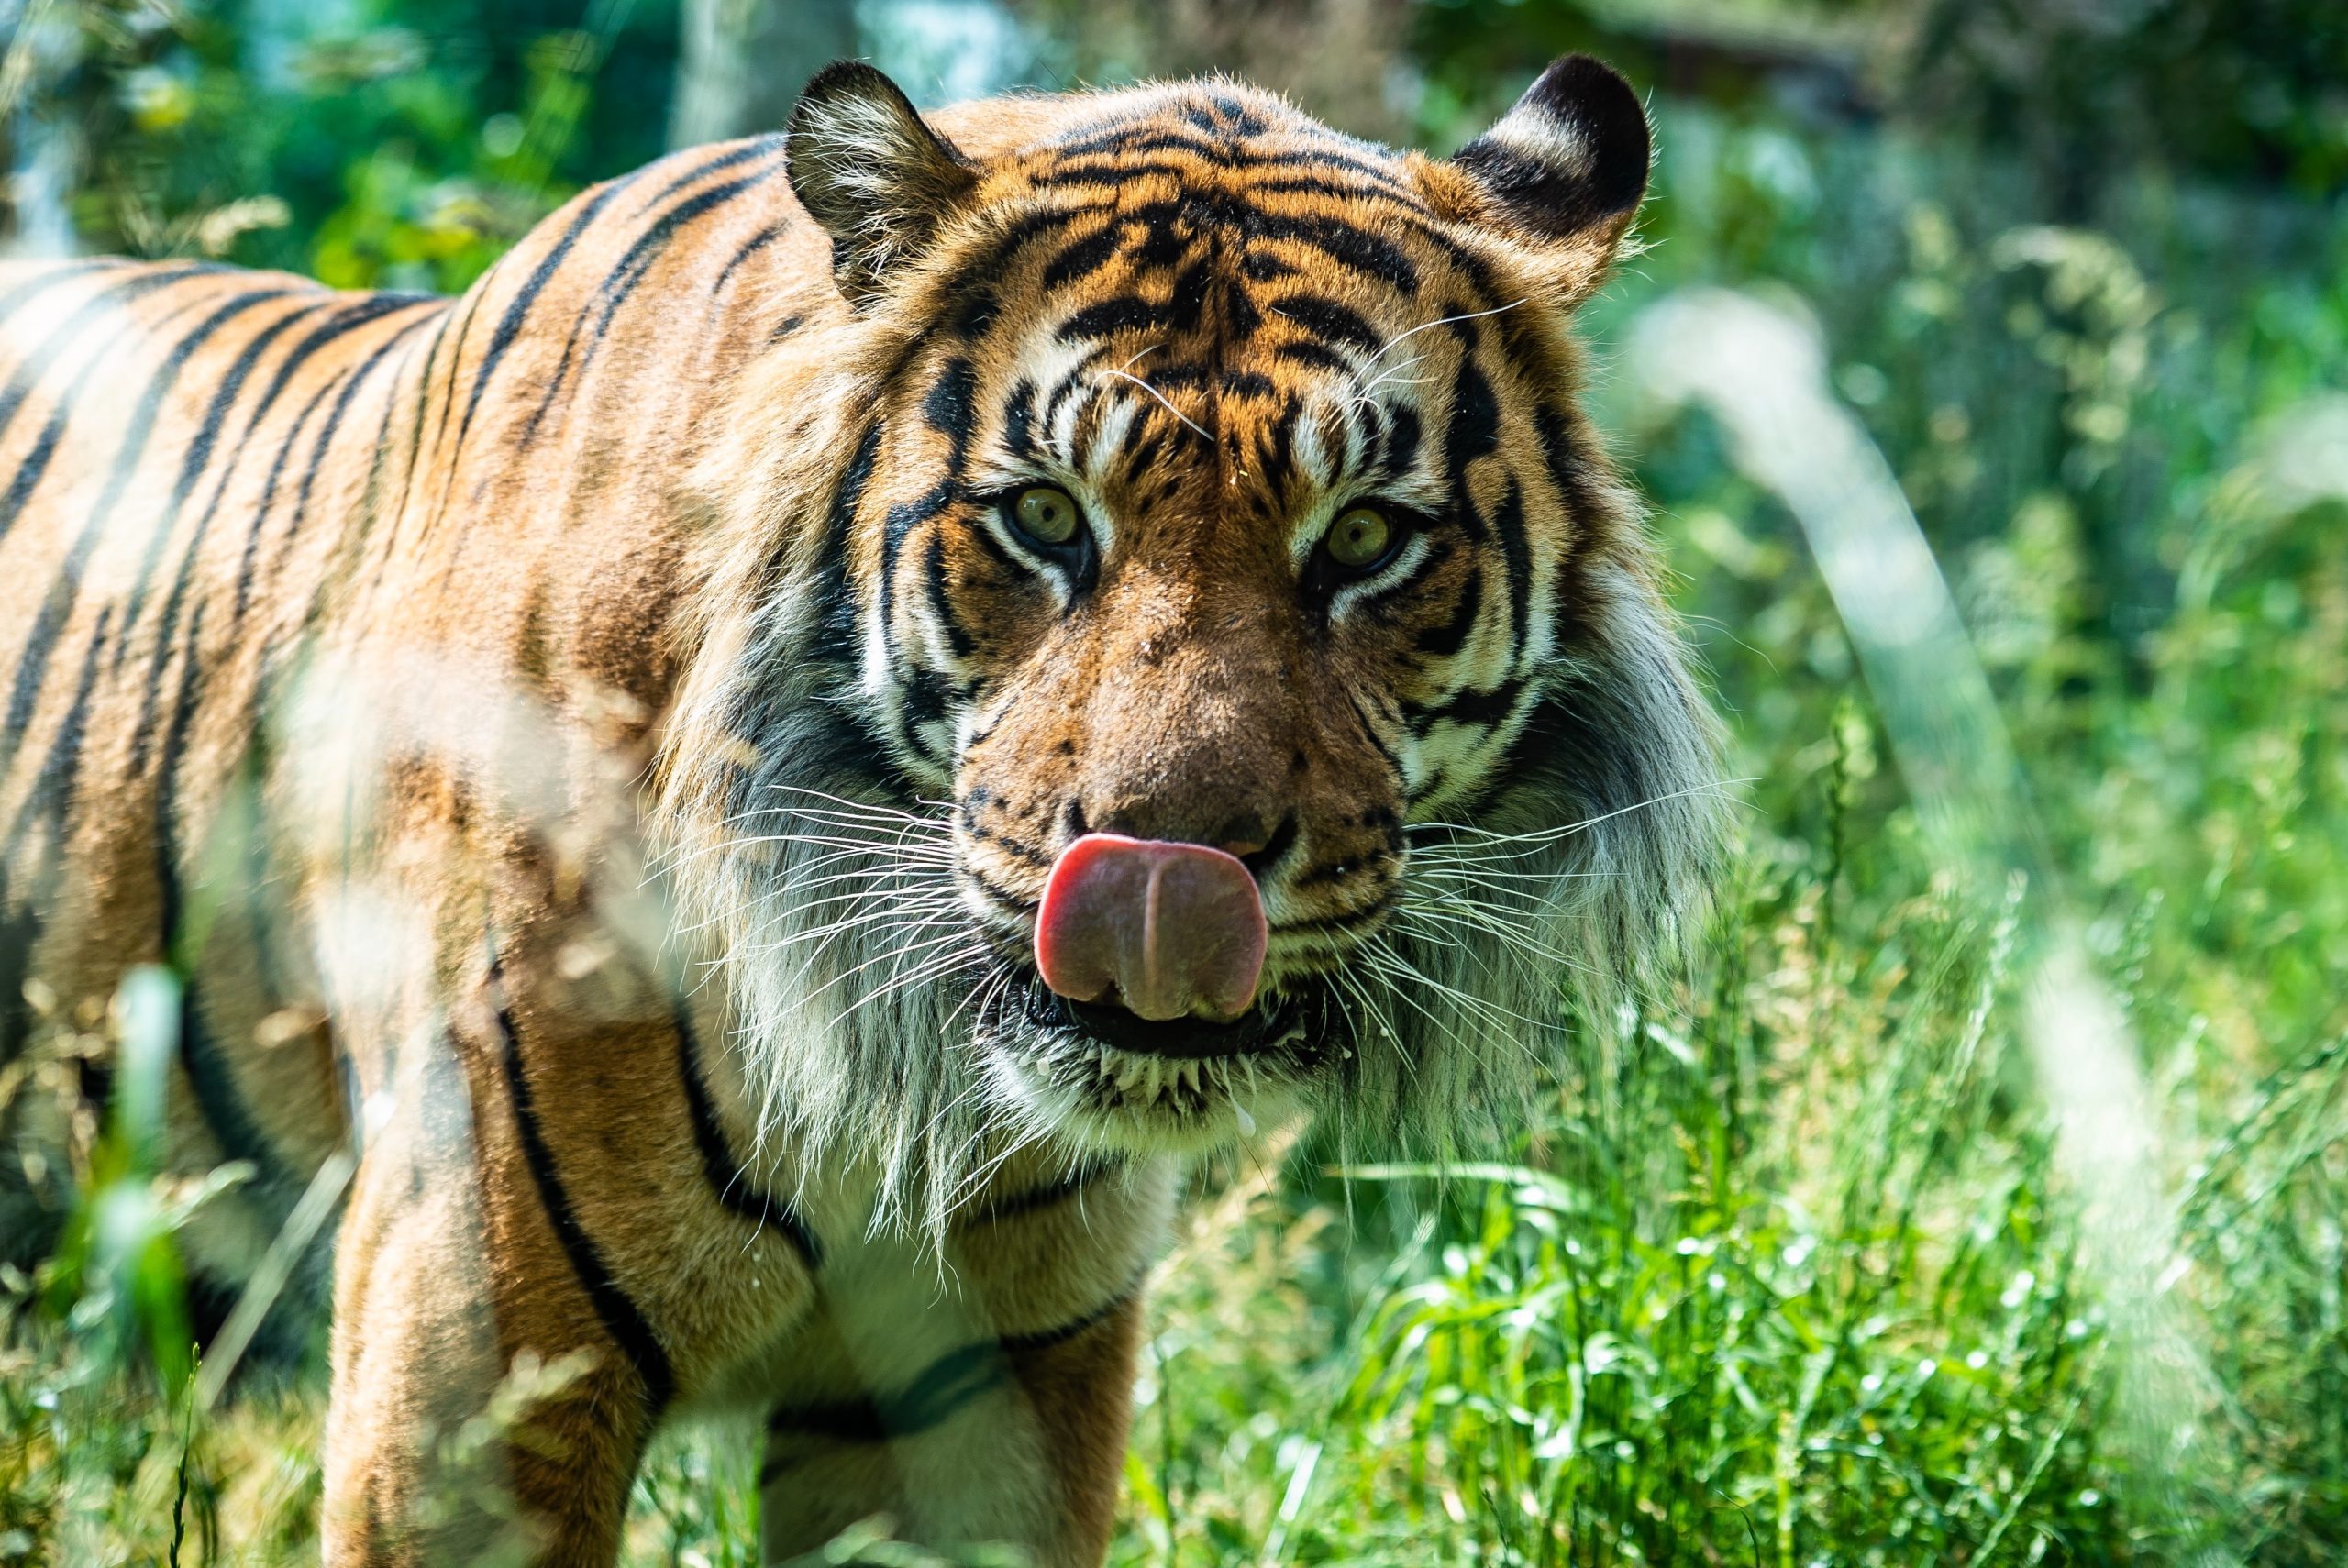 Zoos in London and nearby: explore the fantastic world of nature and animals